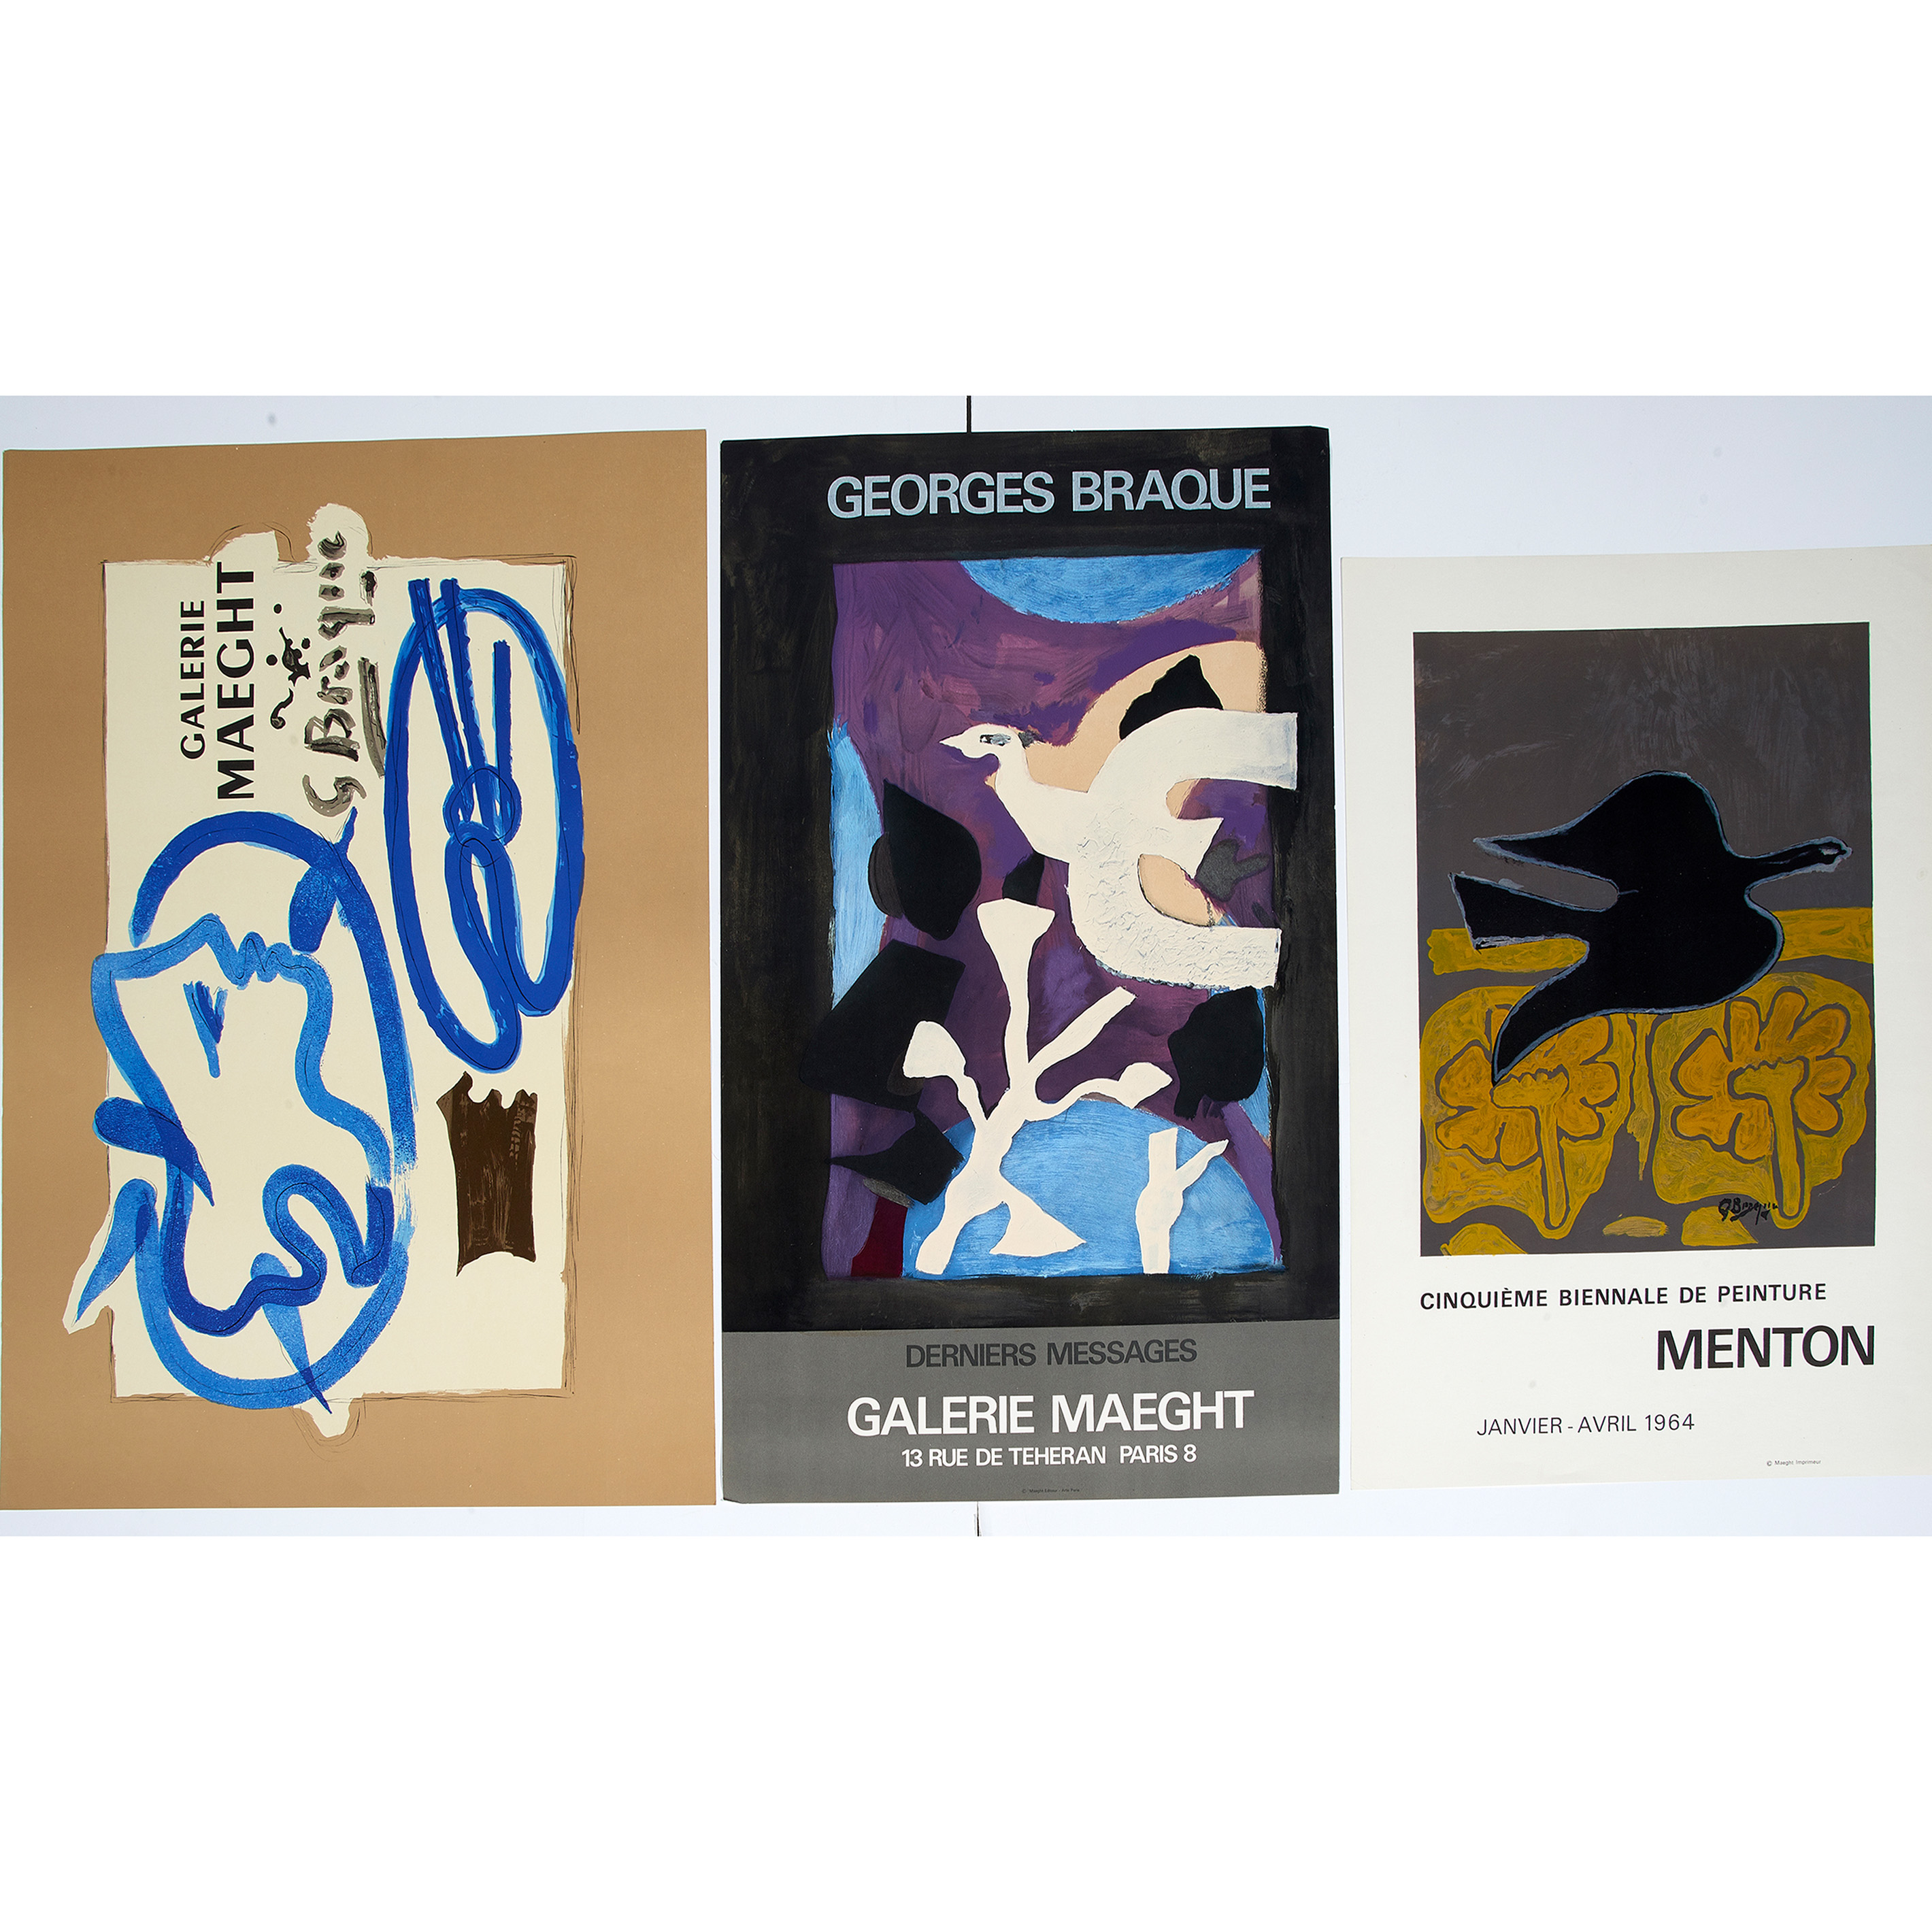 POSTERS, GEORGES BRAQUE (lot of 3) "Georges